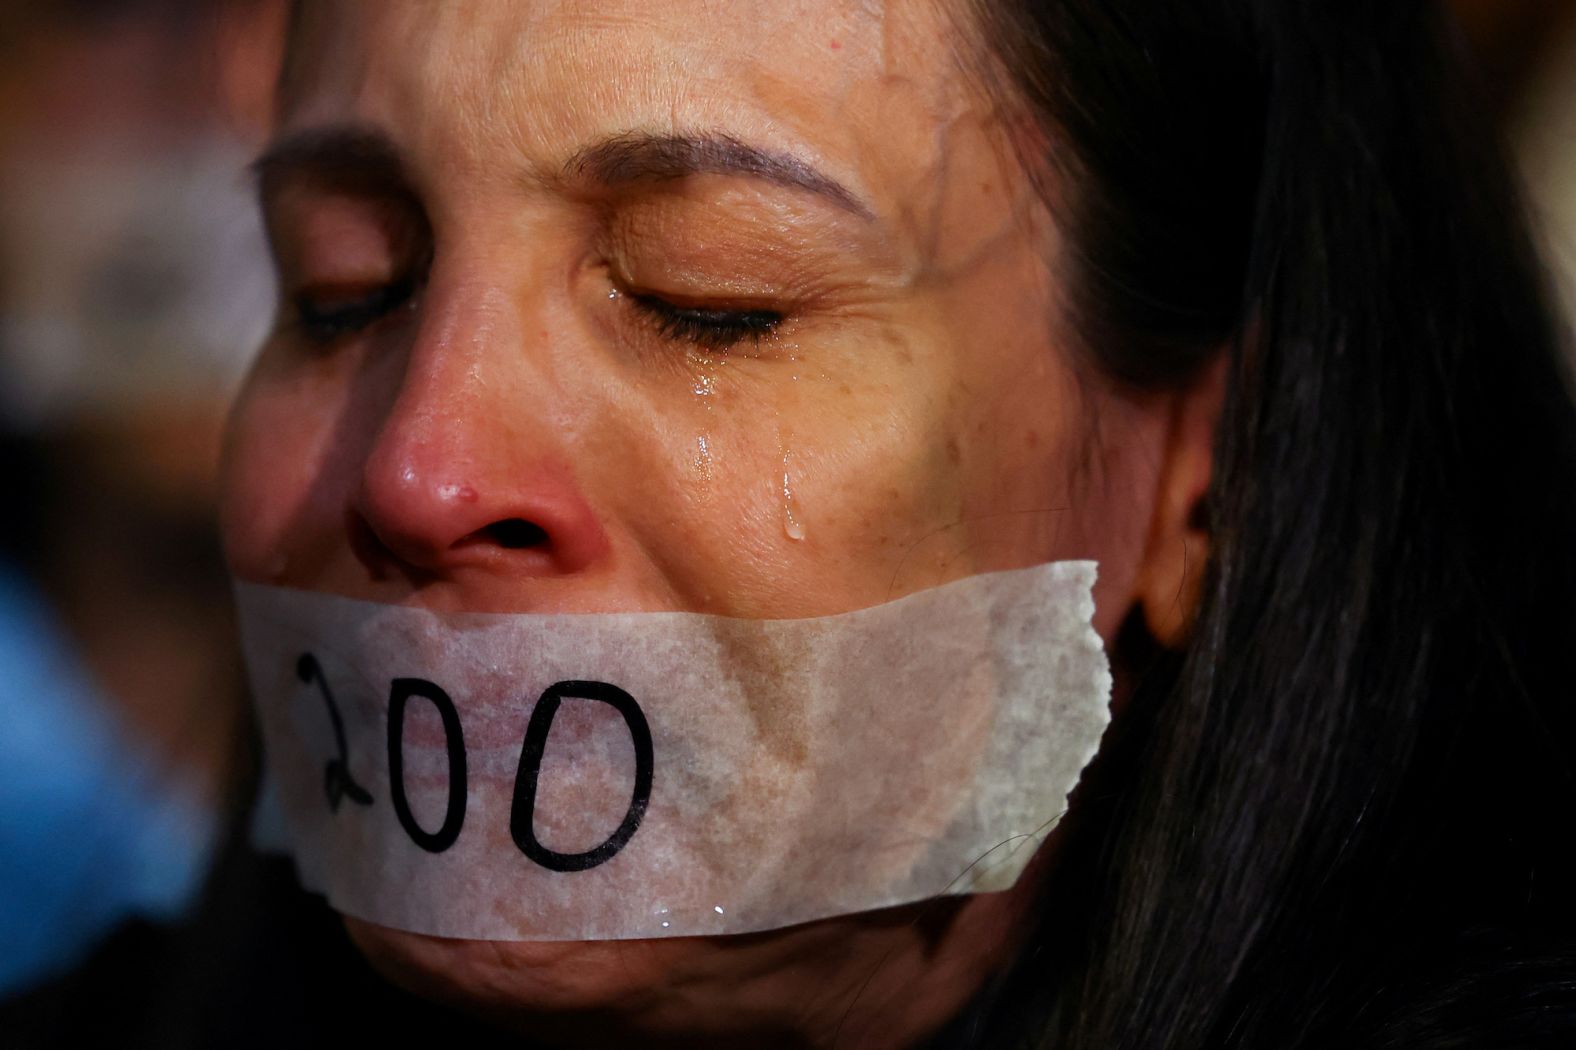 A woman in Tel Aviv, Israel, reacts during a protest marking 200 days since the start of the conflict between Israel and Hamas on Tuesday, April 23.